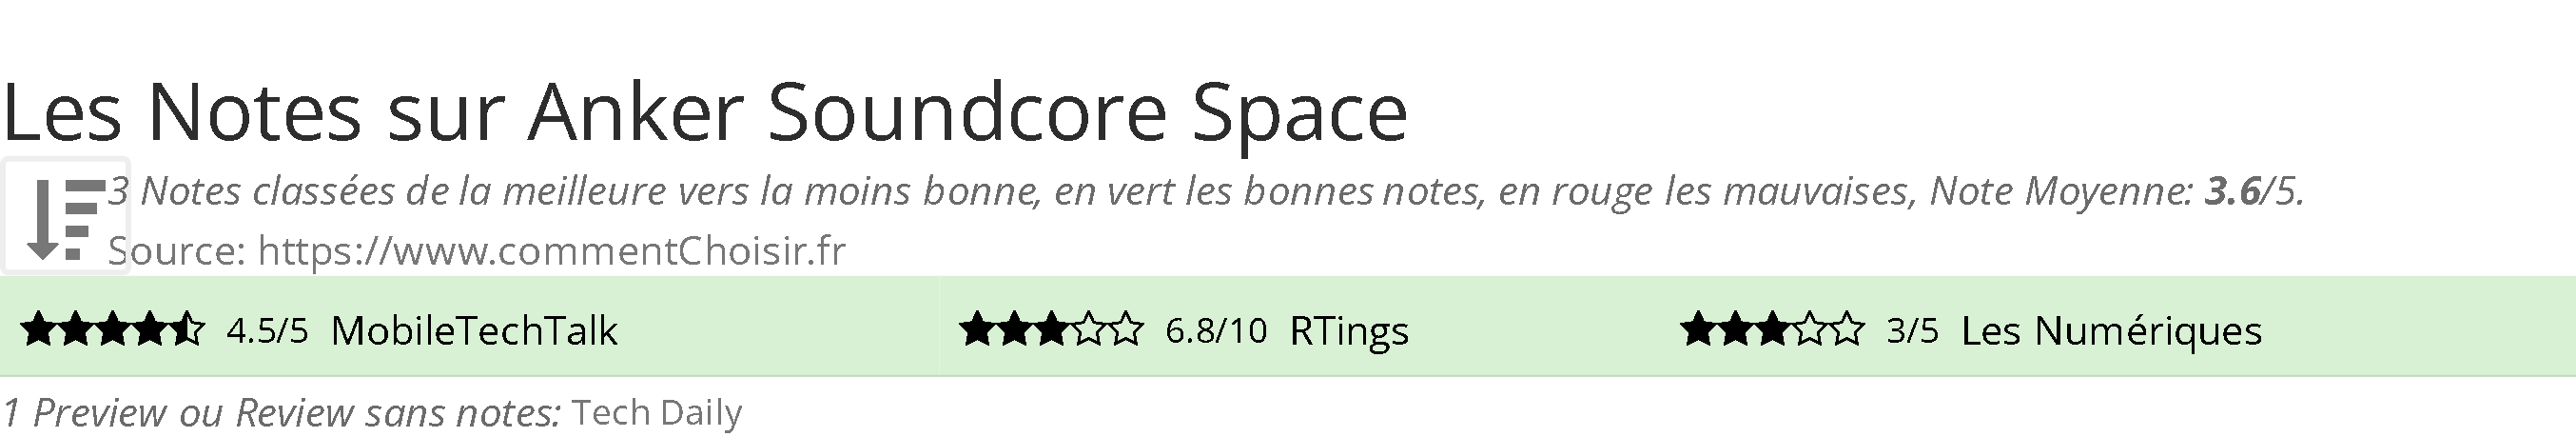 Ratings Anker Soundcore Space